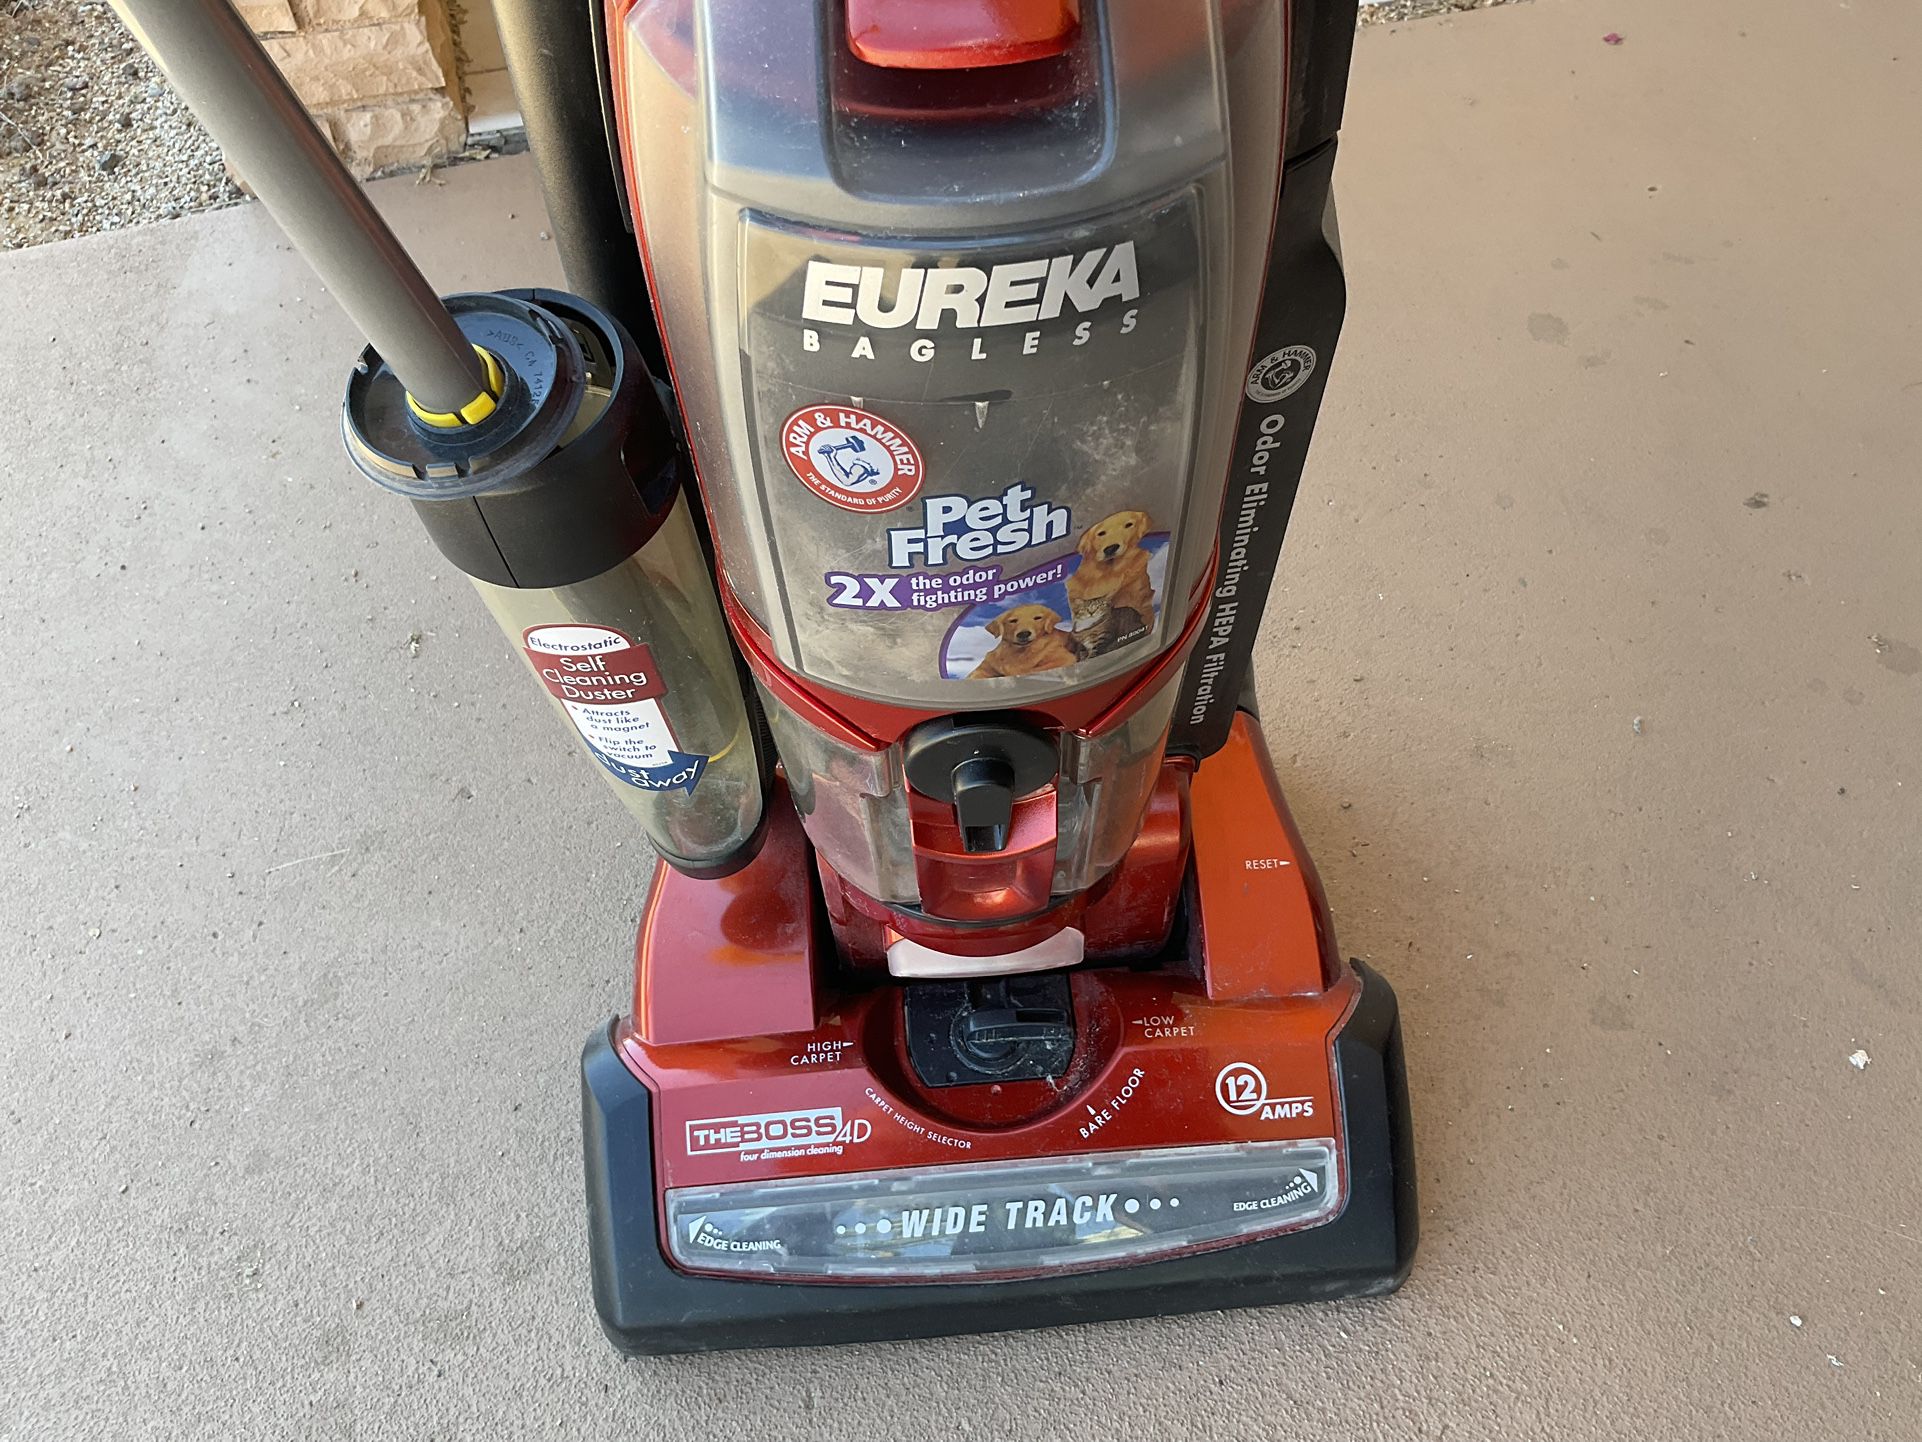 Eureka Bag, Less Vacuum Cleaner With A Dust Mop That Cleans Itself. $30